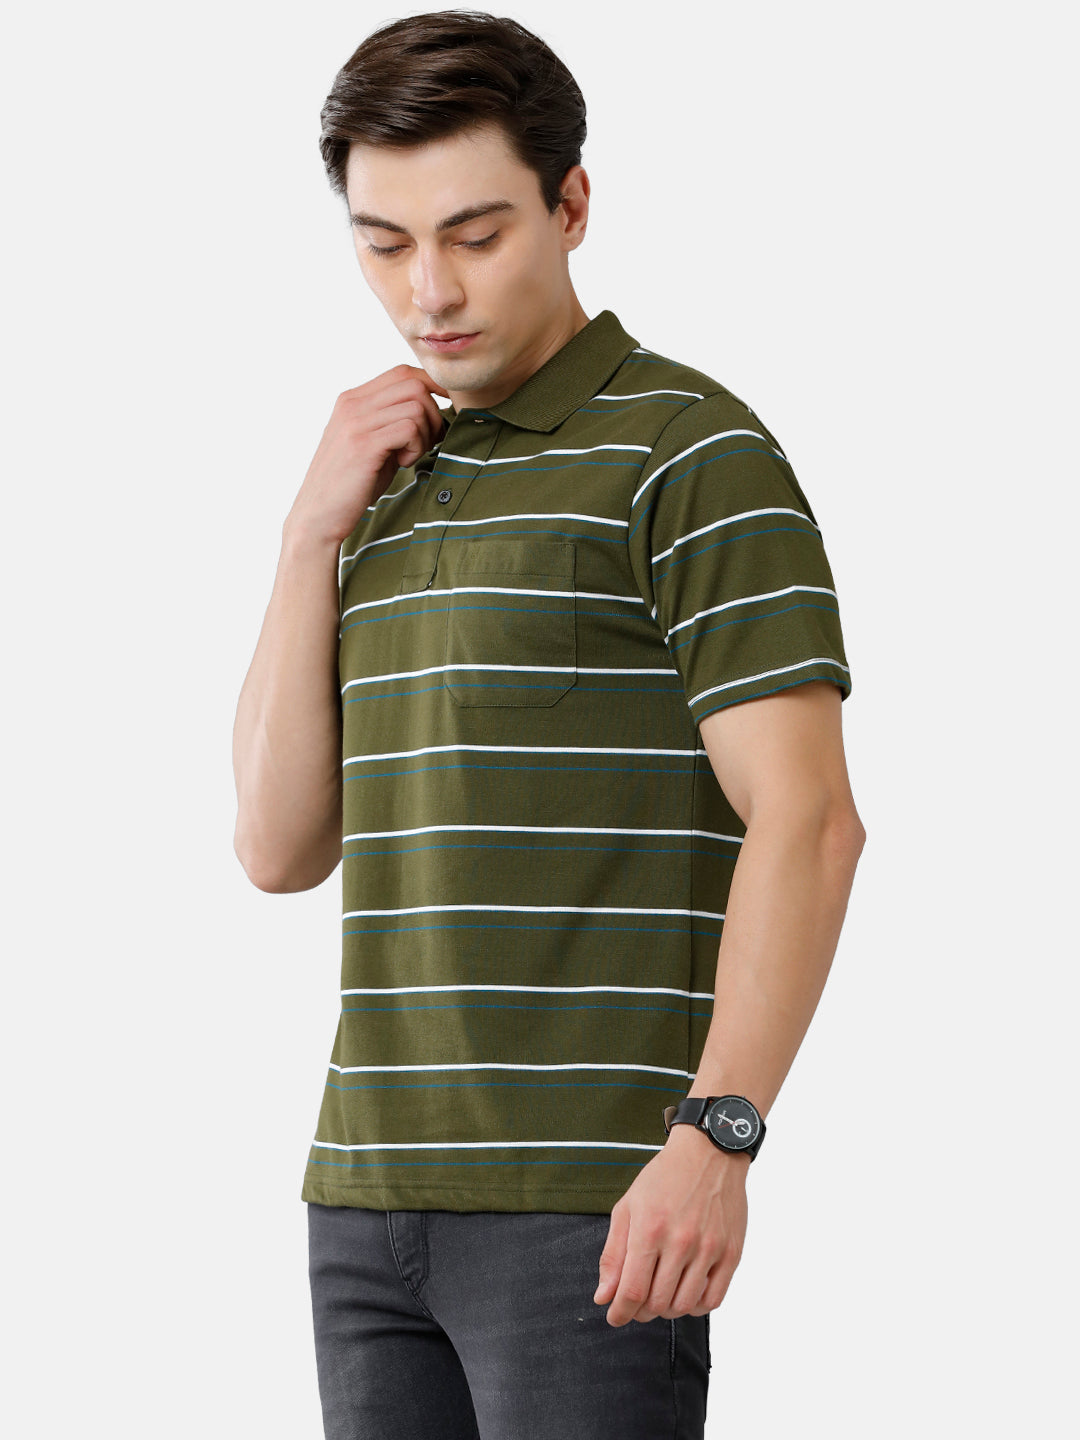 Classic Polo Mens Cotton Blend Half Sleeve Striped Authentic Fit Polo Neck Olive Green Color T-Shirt | Avon 484 A